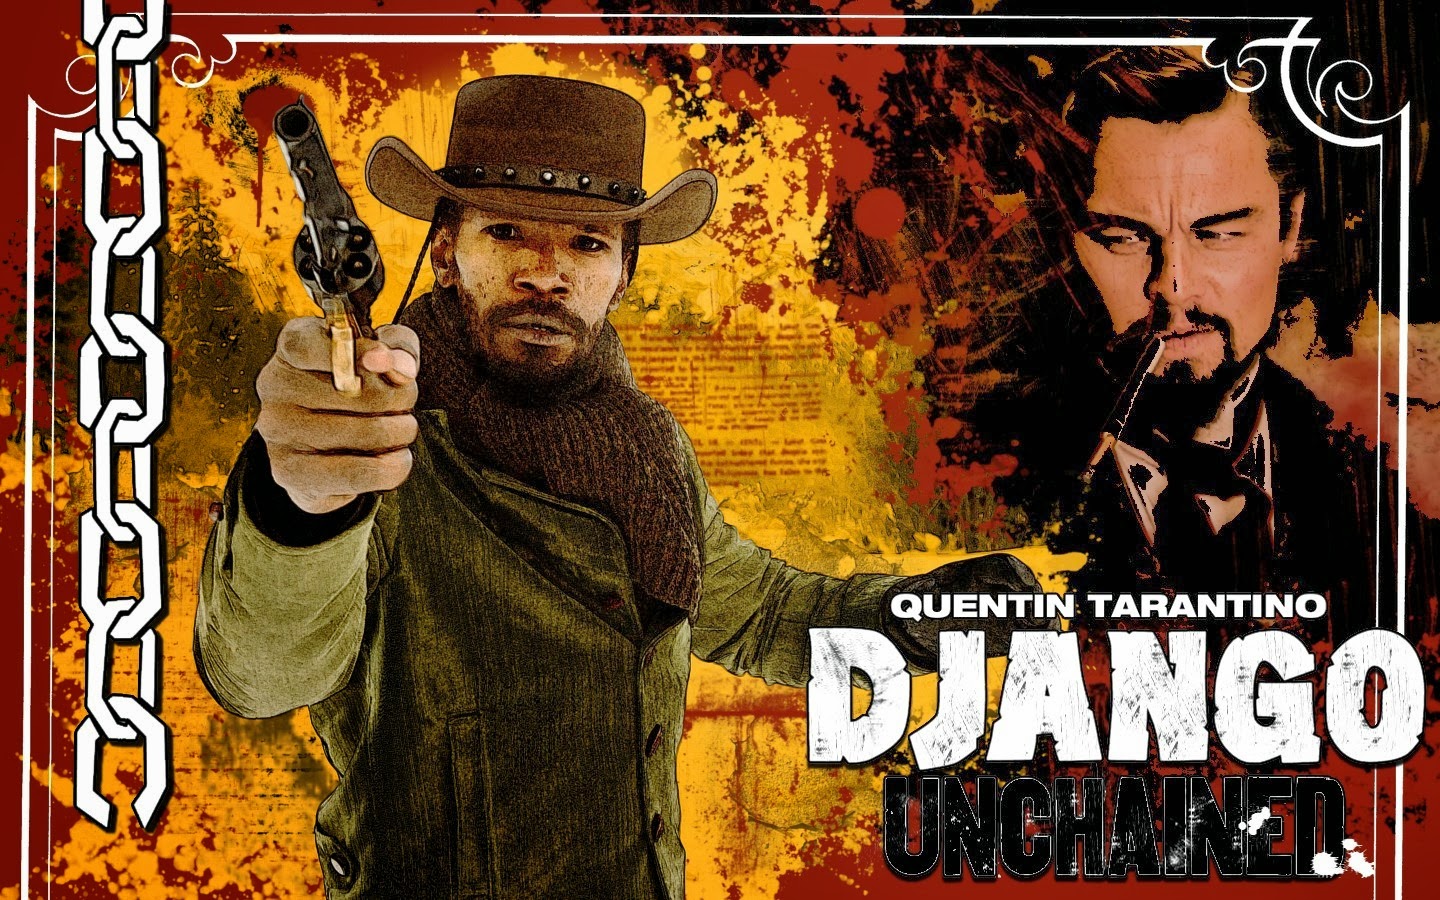 all the hd images of django unchained HD images of Django unchained ...